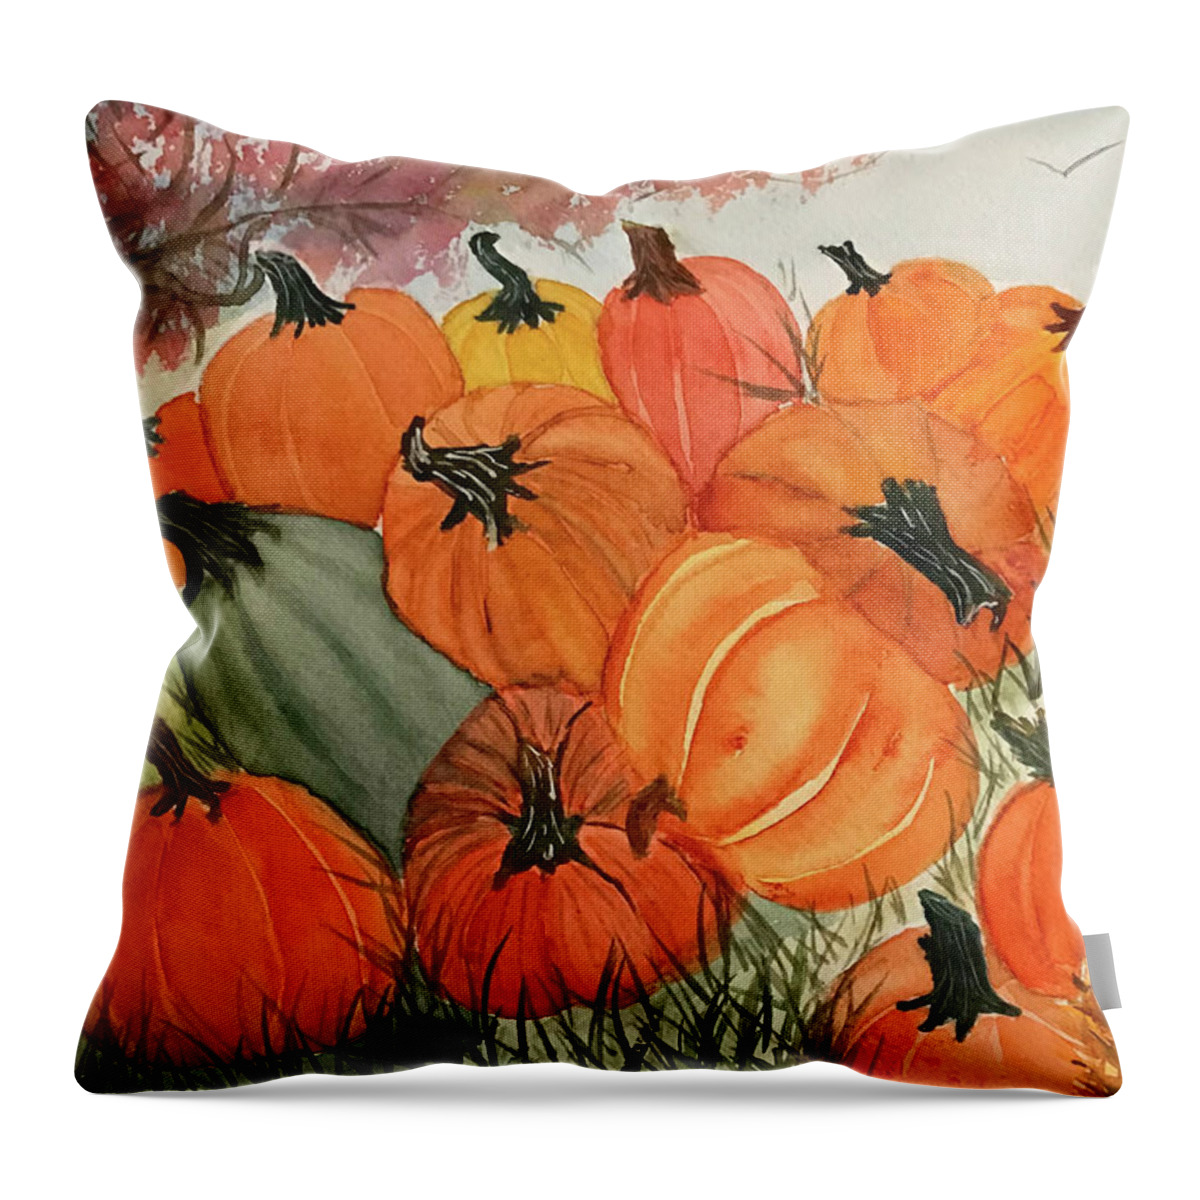 Fall Throw Pillow featuring the painting Pile of Pumpkins by Lisa Neuman